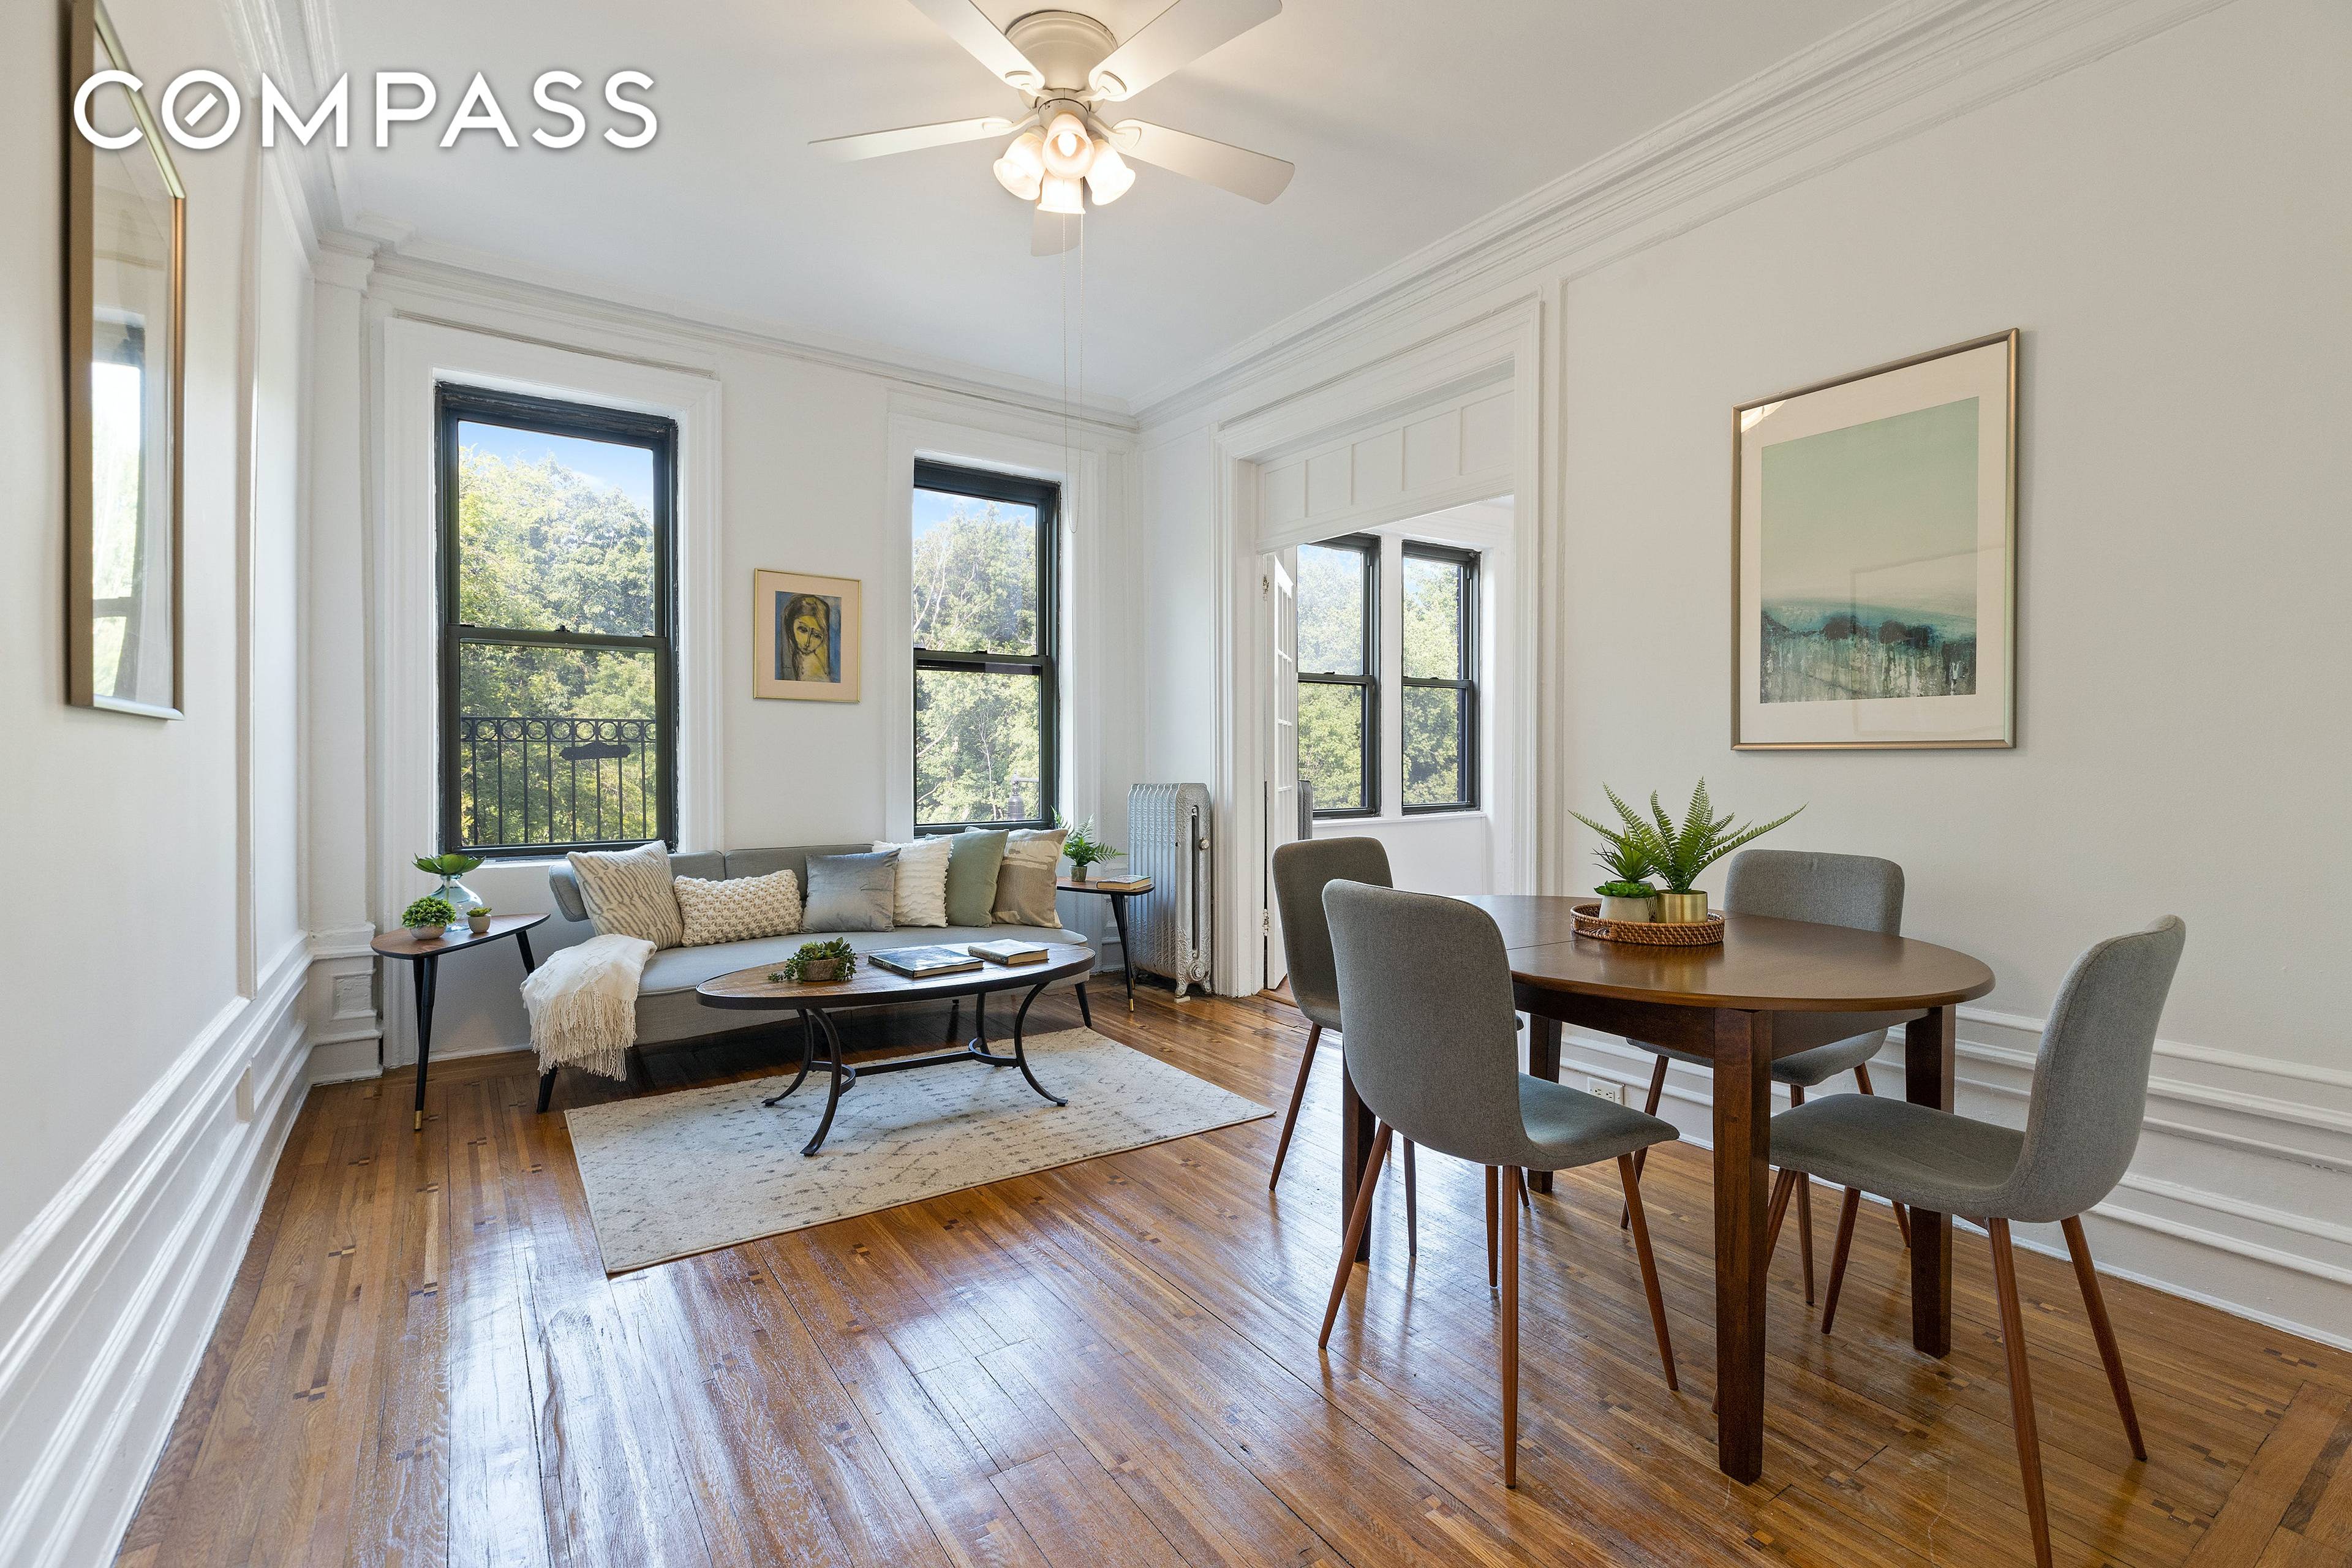 Prospect Park Views ! This is a dream opportunity to live in a well maintained pre war two bedroom apartment facing Prospect Park, in one of the most desirable locations ...